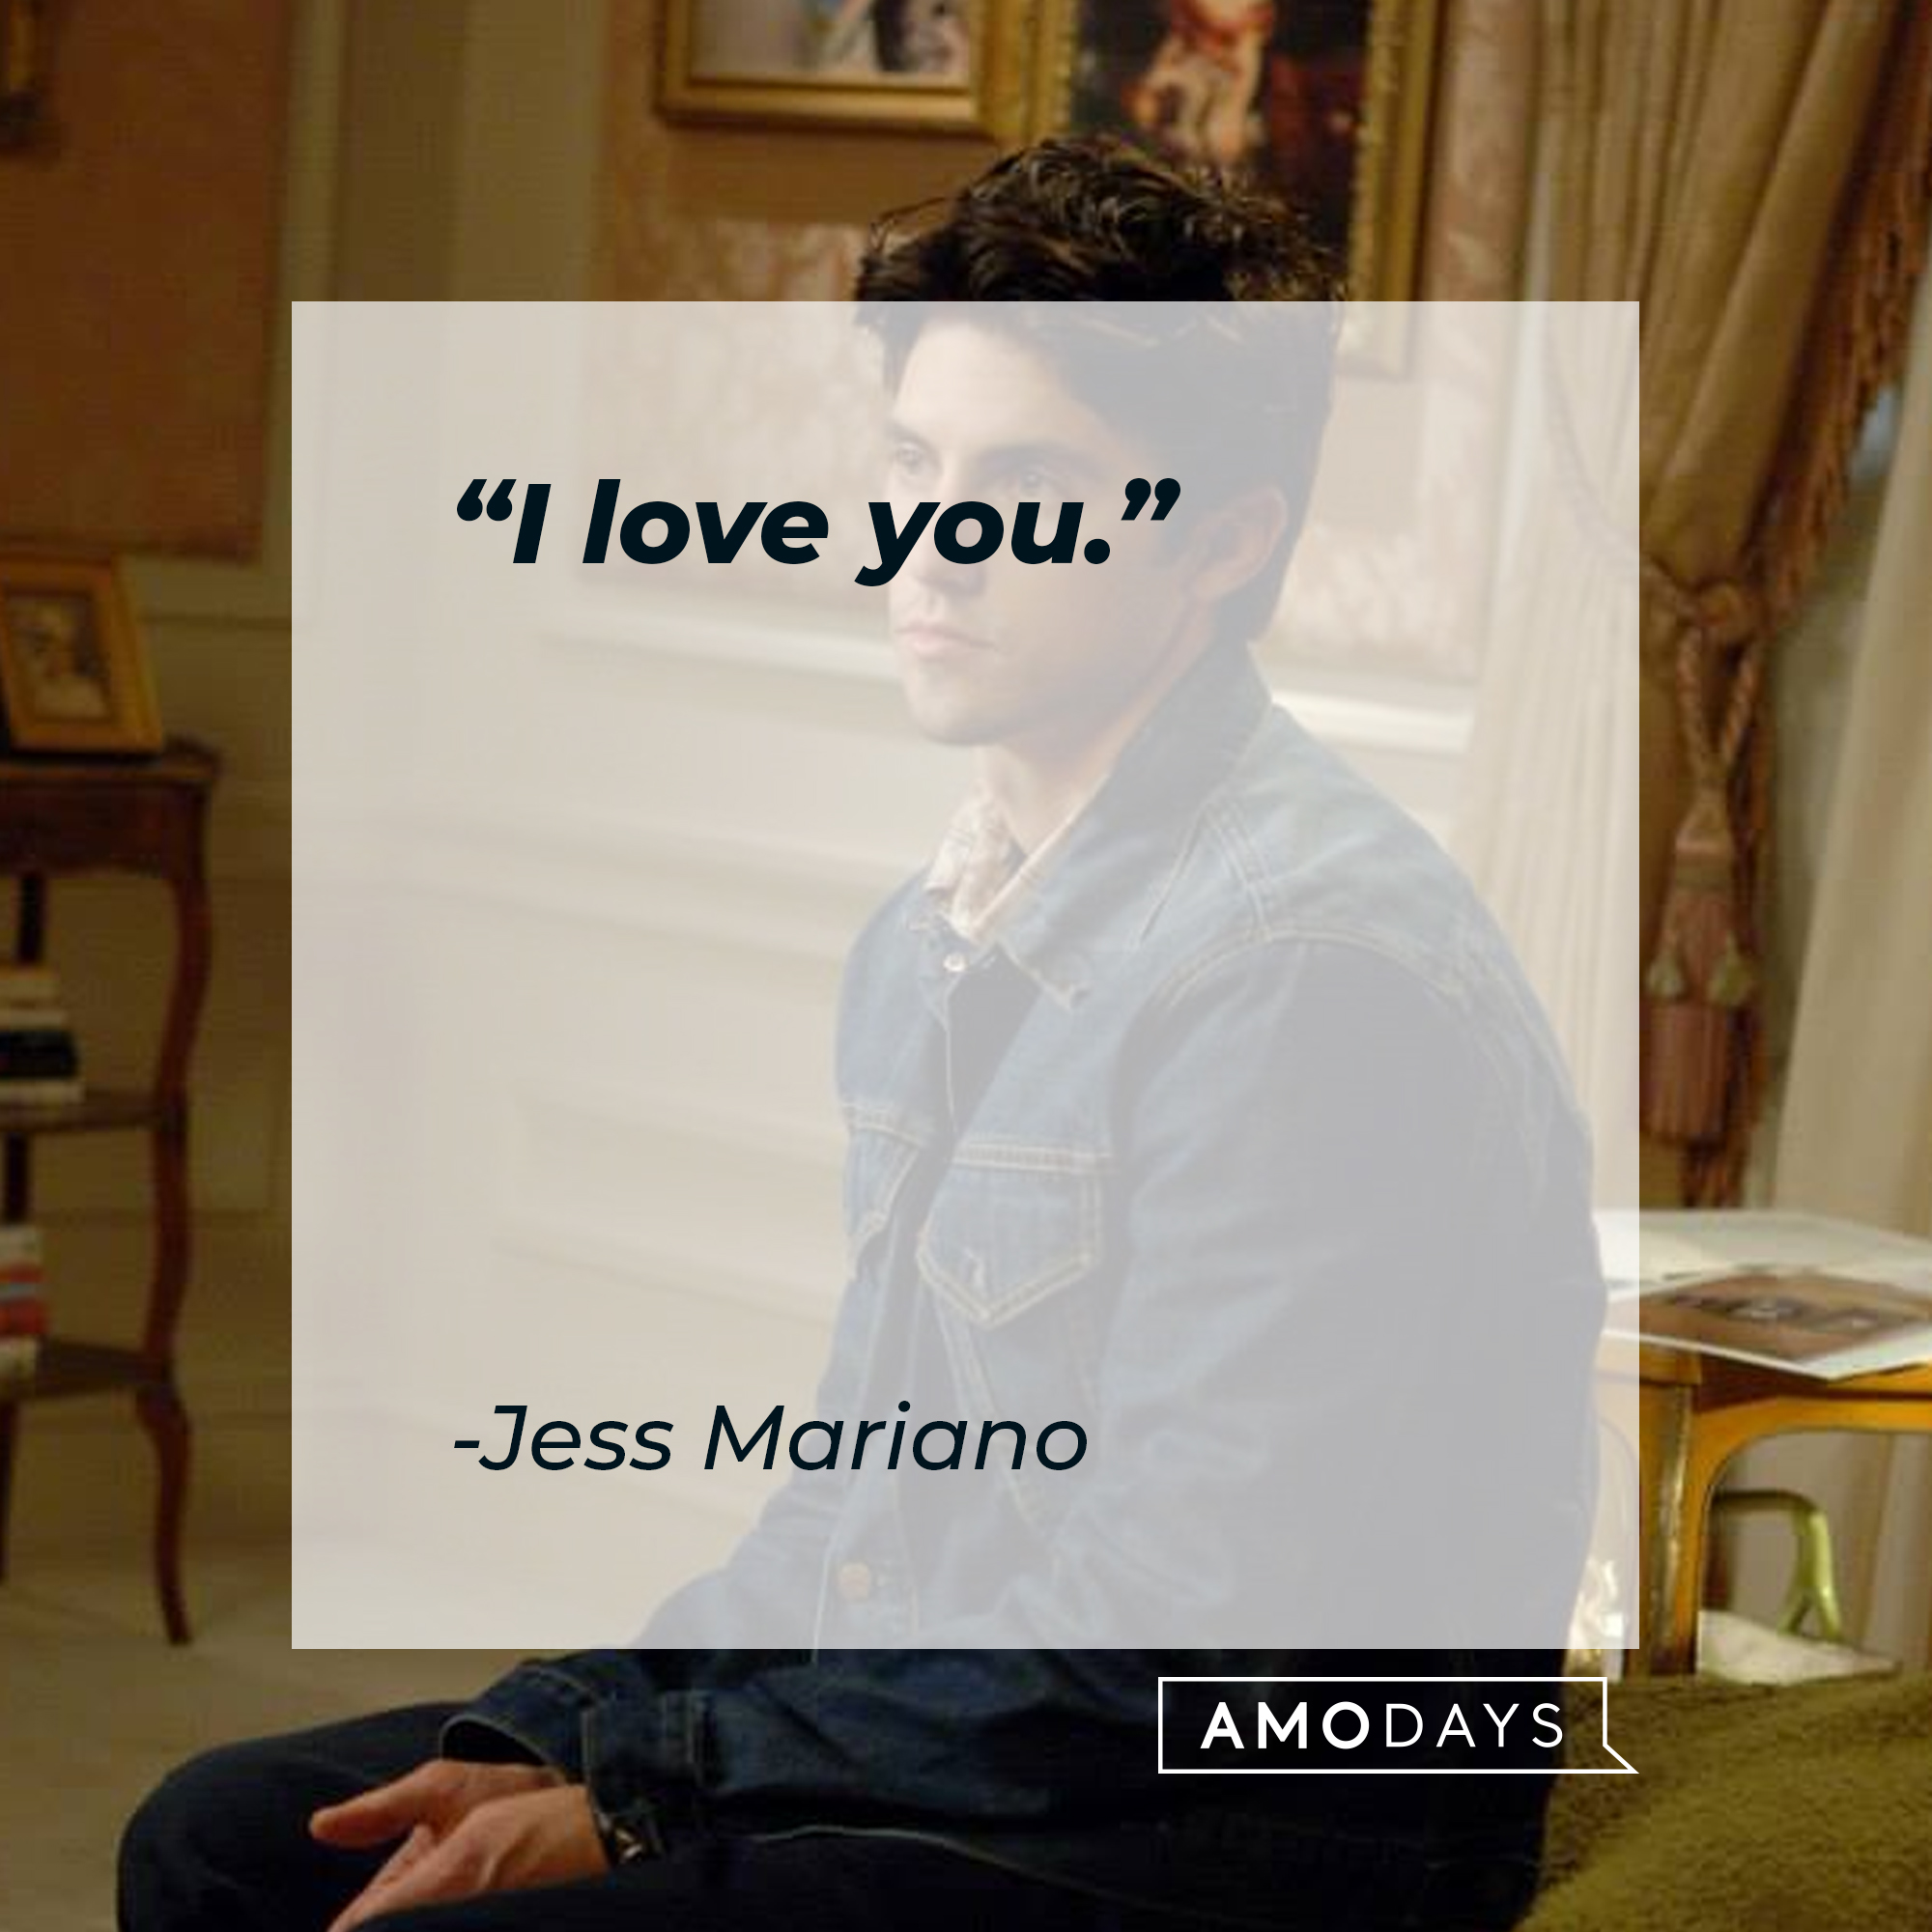 Jess Mariano, with his quote: “I love you.” | Source: facebook.com/GilmoreGirls